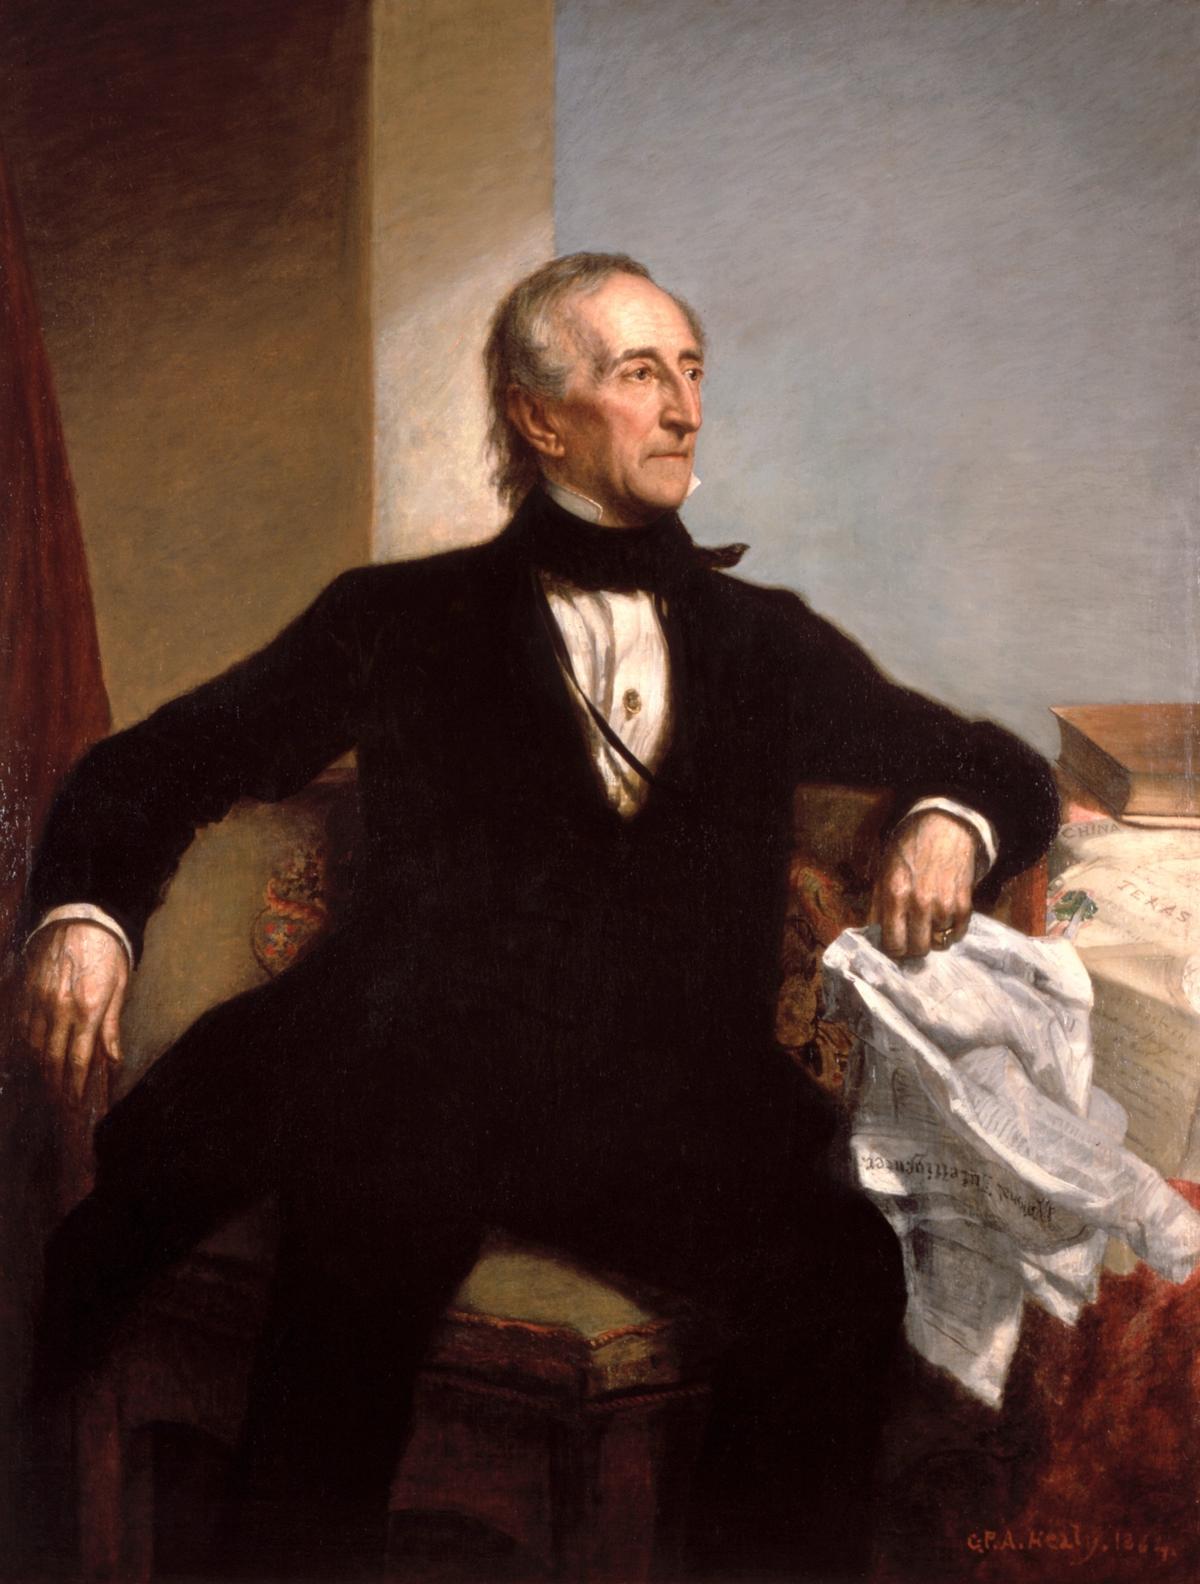 “John Tyler” by George Peter Alexander Healy, 1864. Oil on canvas. White House. (Public Domain)